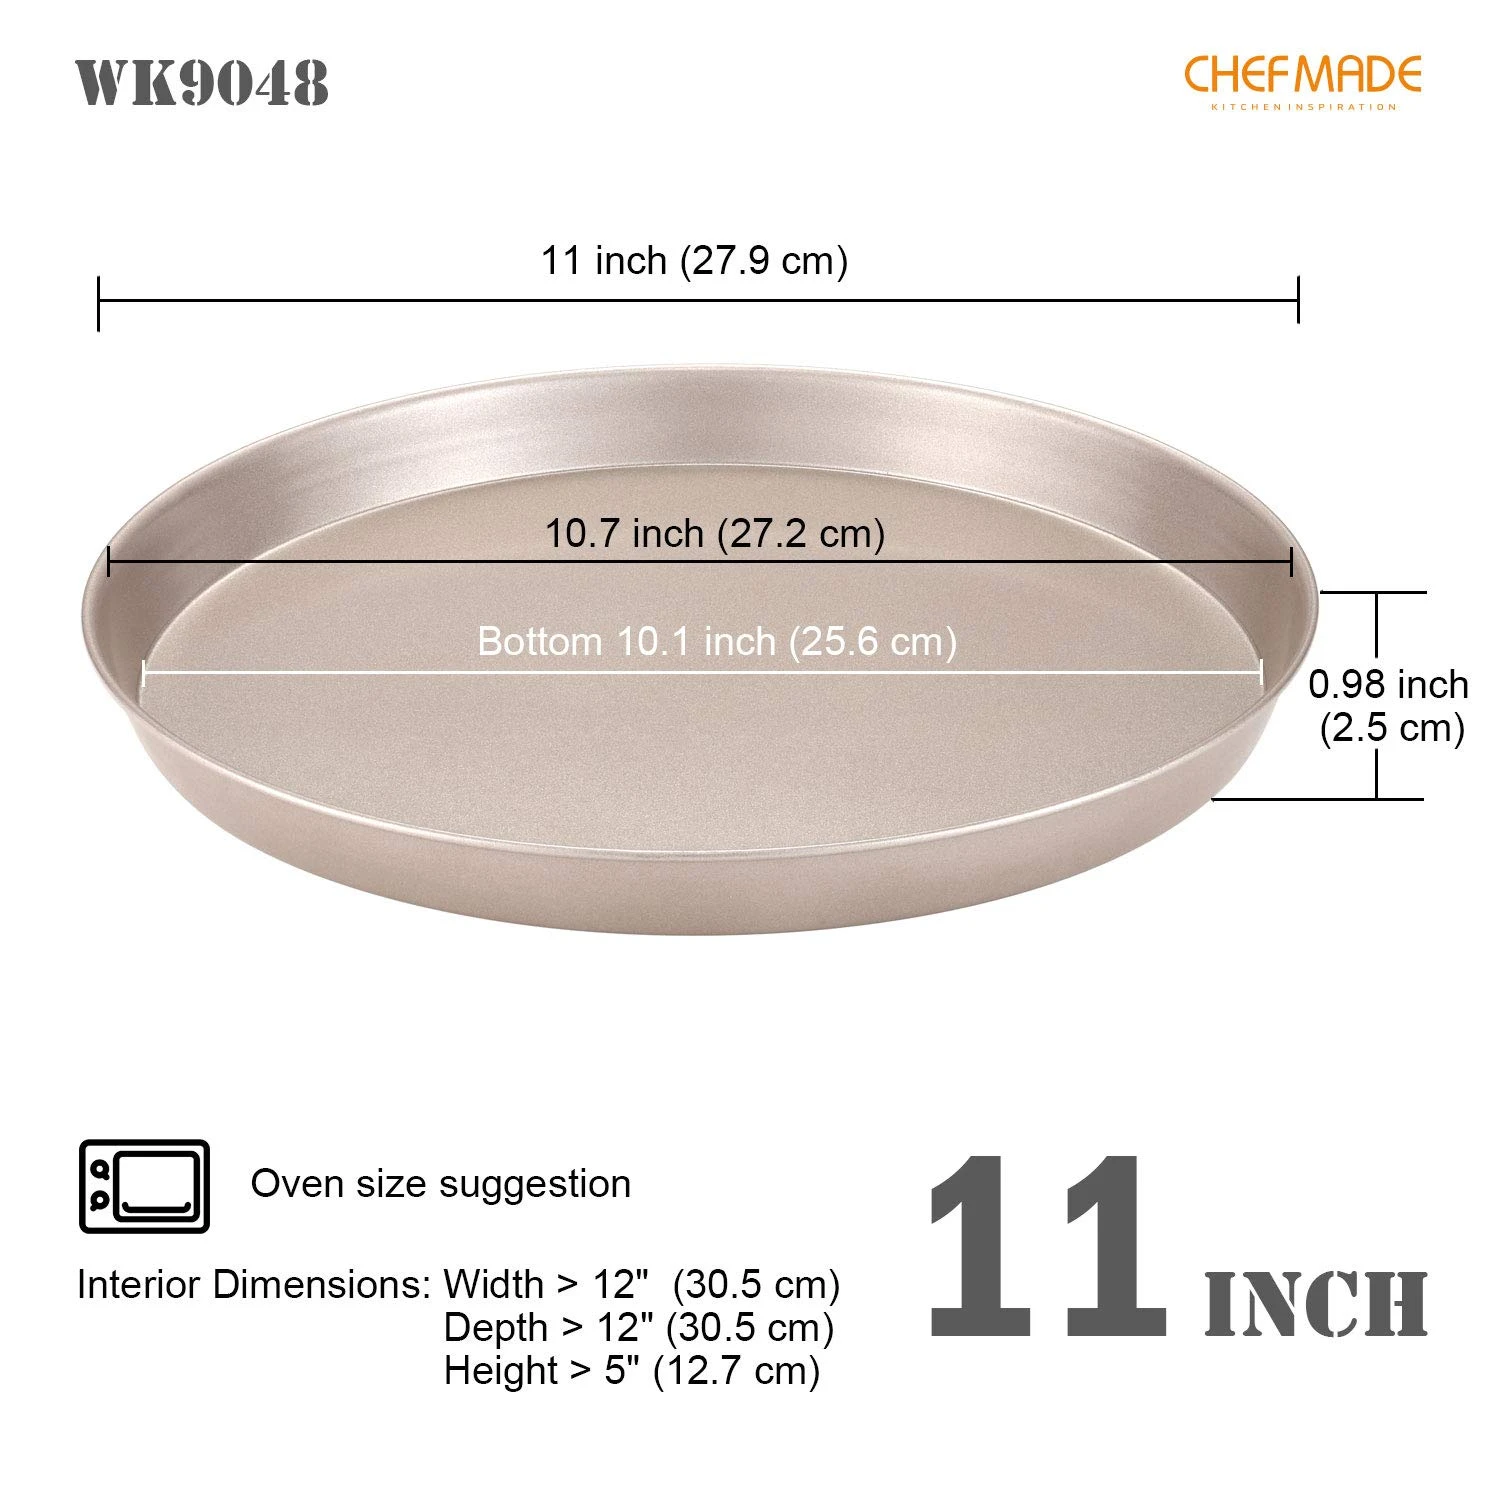 CHEFMADE 10-Inch Non-Stick Pancake Bakeware Pizza Pan Tray for Oven Baking (Champagne Gold)